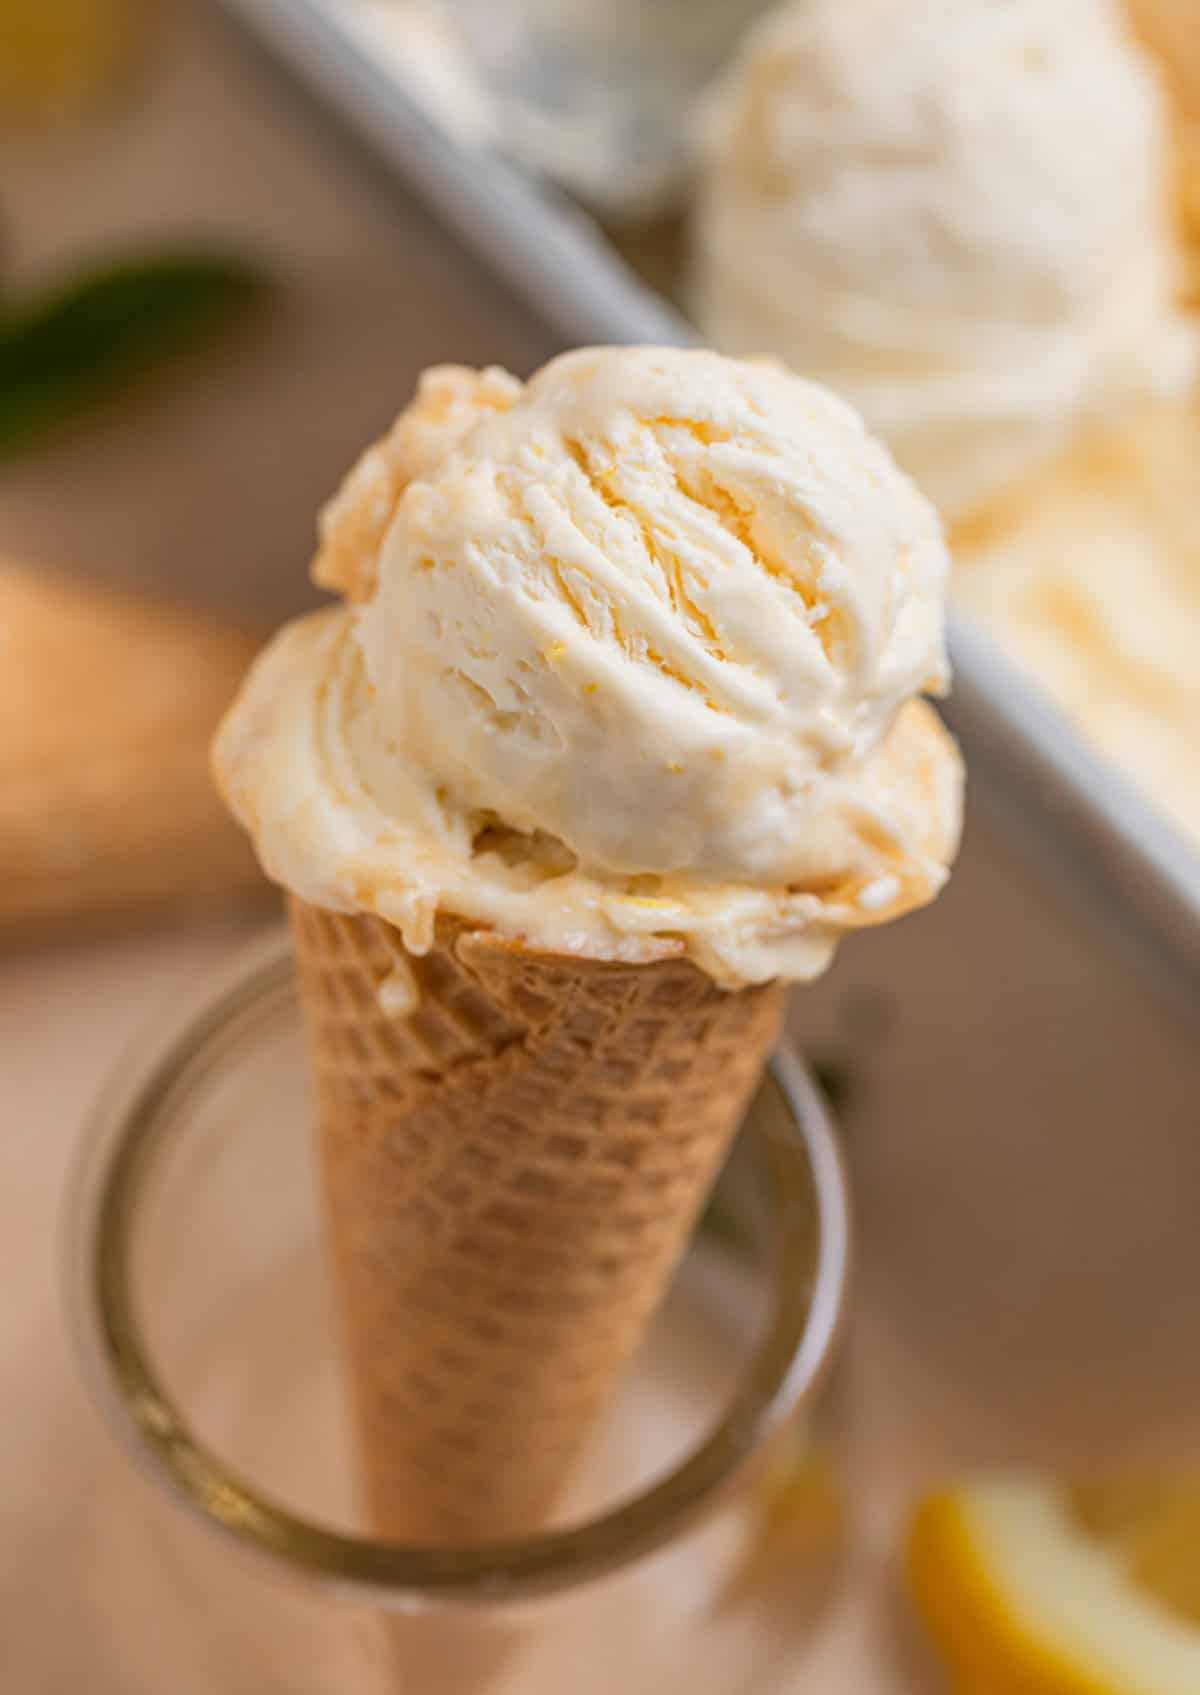 Sugar ice cream cone topped with no churn lemon ice cream propped up in glass.